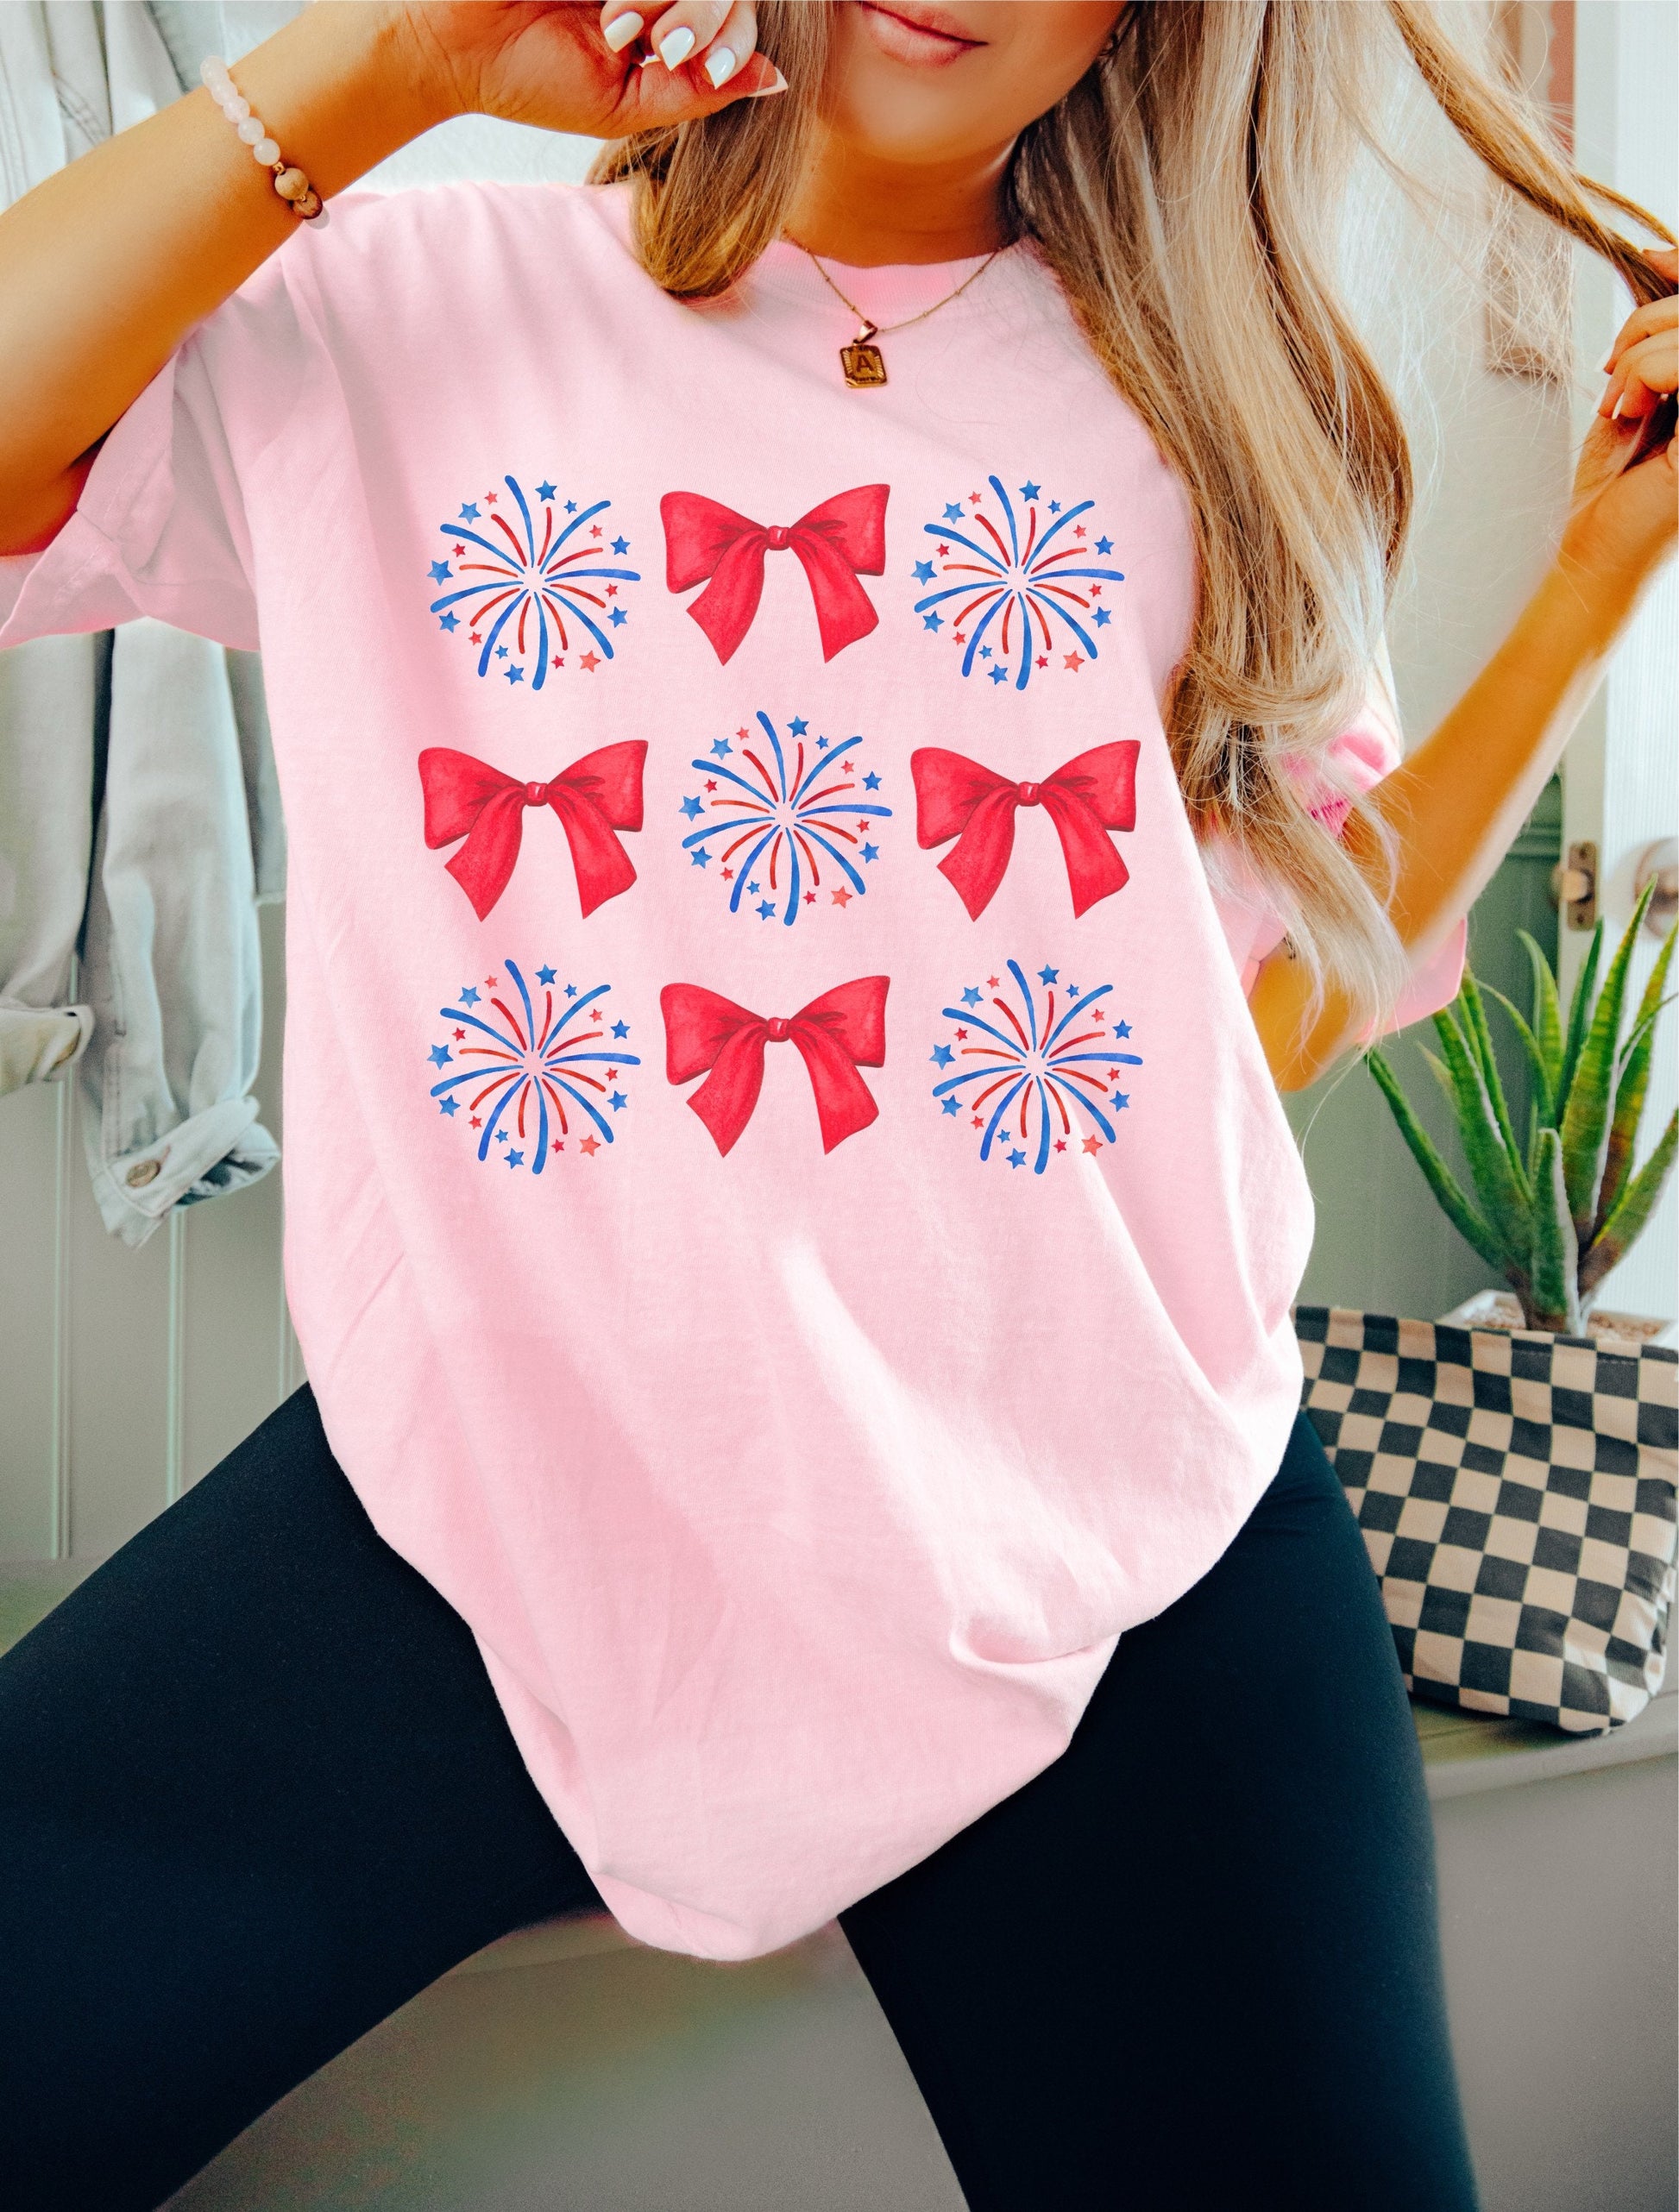 July 4th Shirt, Coquette 4th of July Shirt, USA Shirt, Retro 4th of July Shirt, Comfort Colors® Shirt, Summertime Tee, Fireworks and Bows